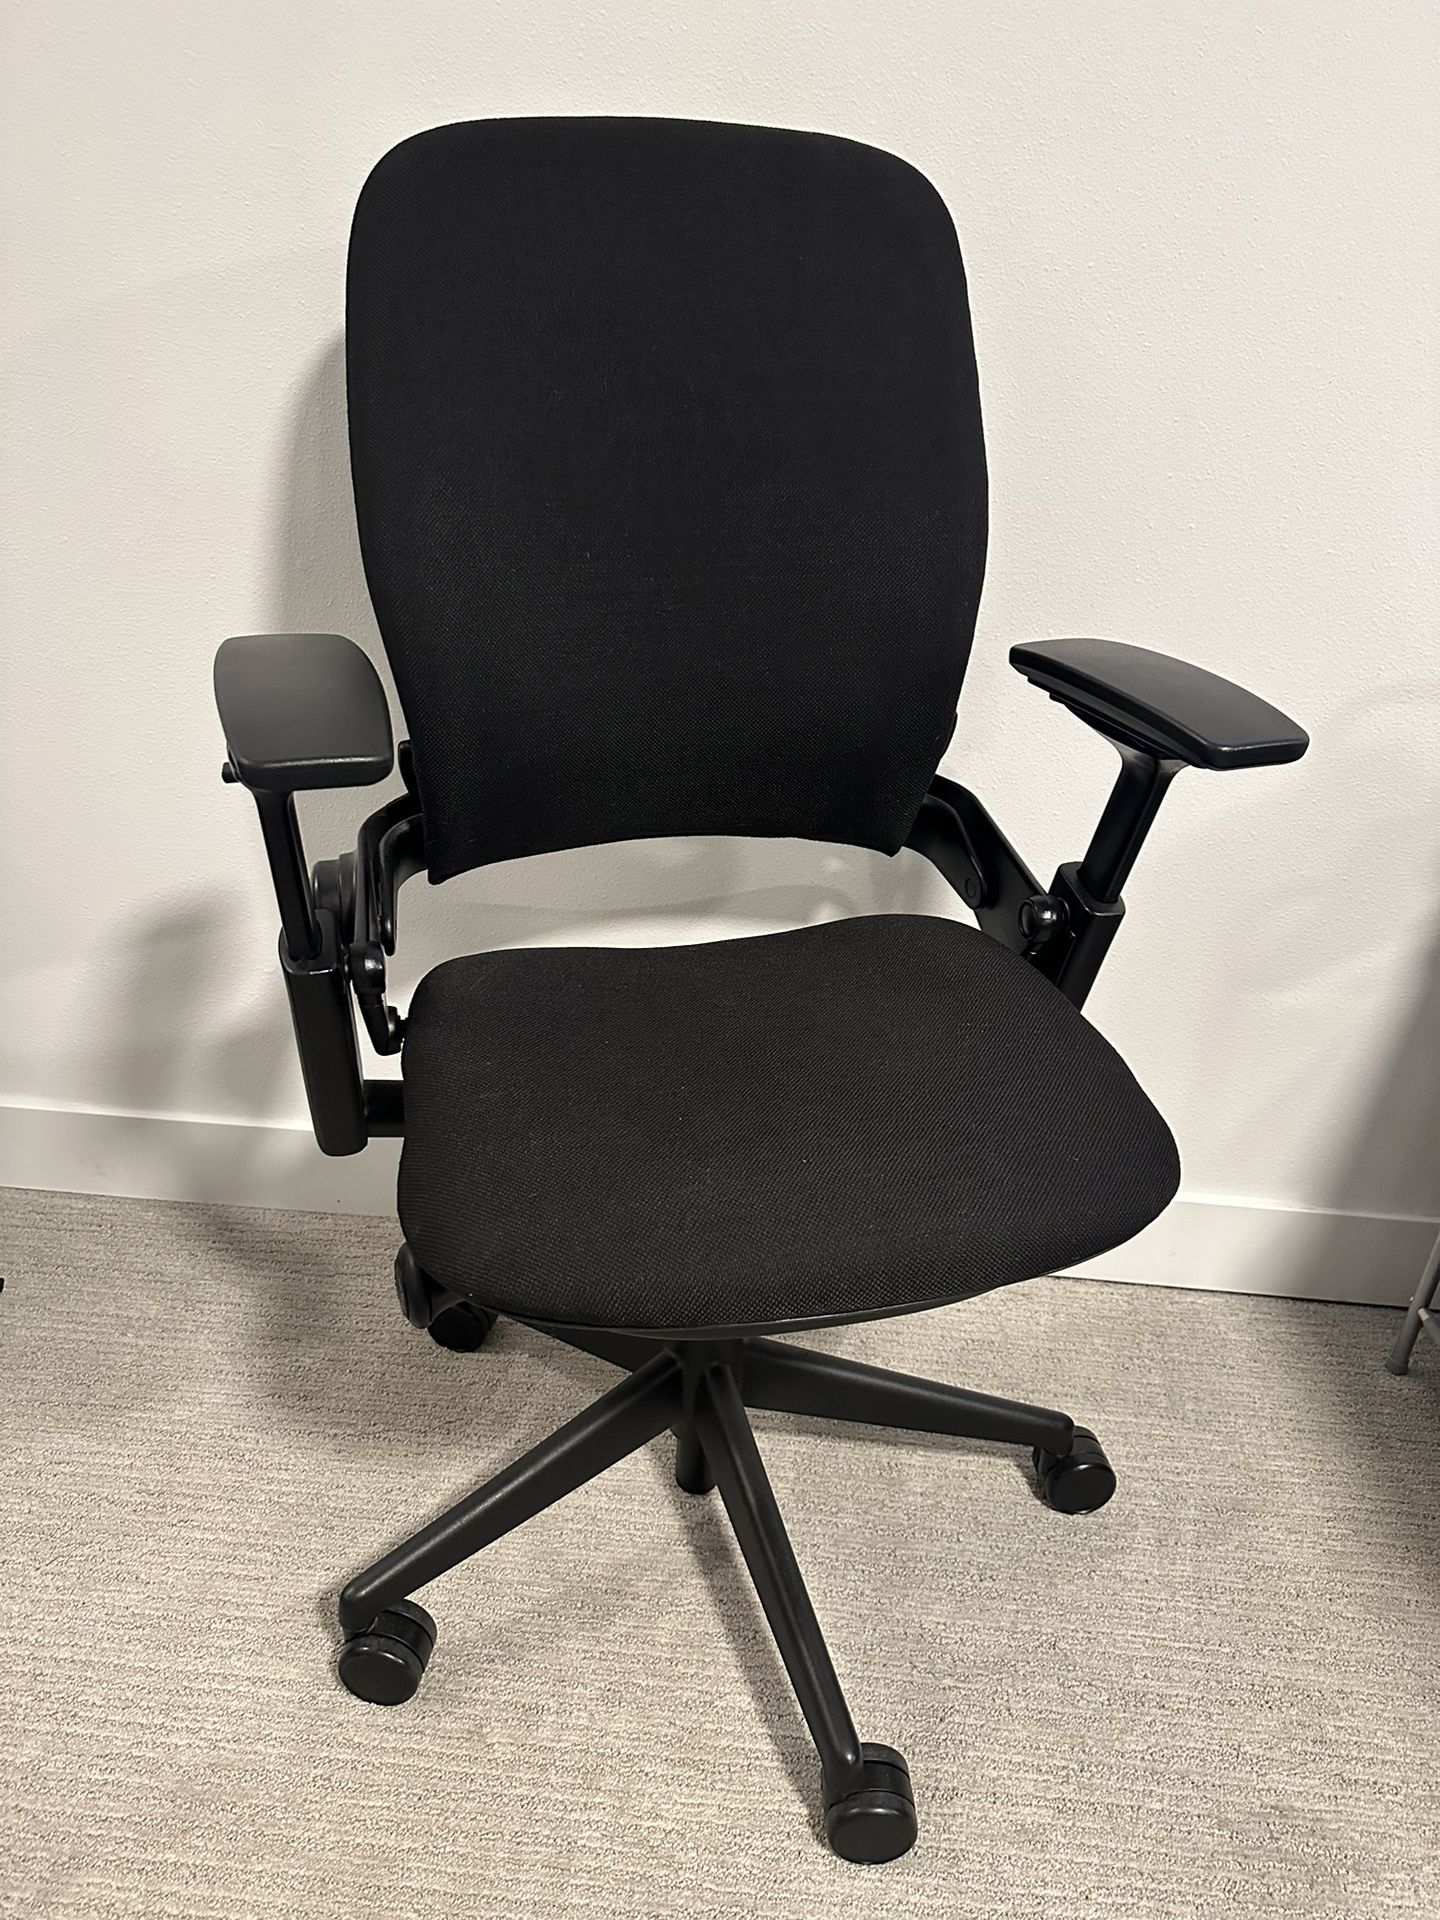 Steelcase Leap Chair - Black - Fabric - Very Comfortable, High Adjustable